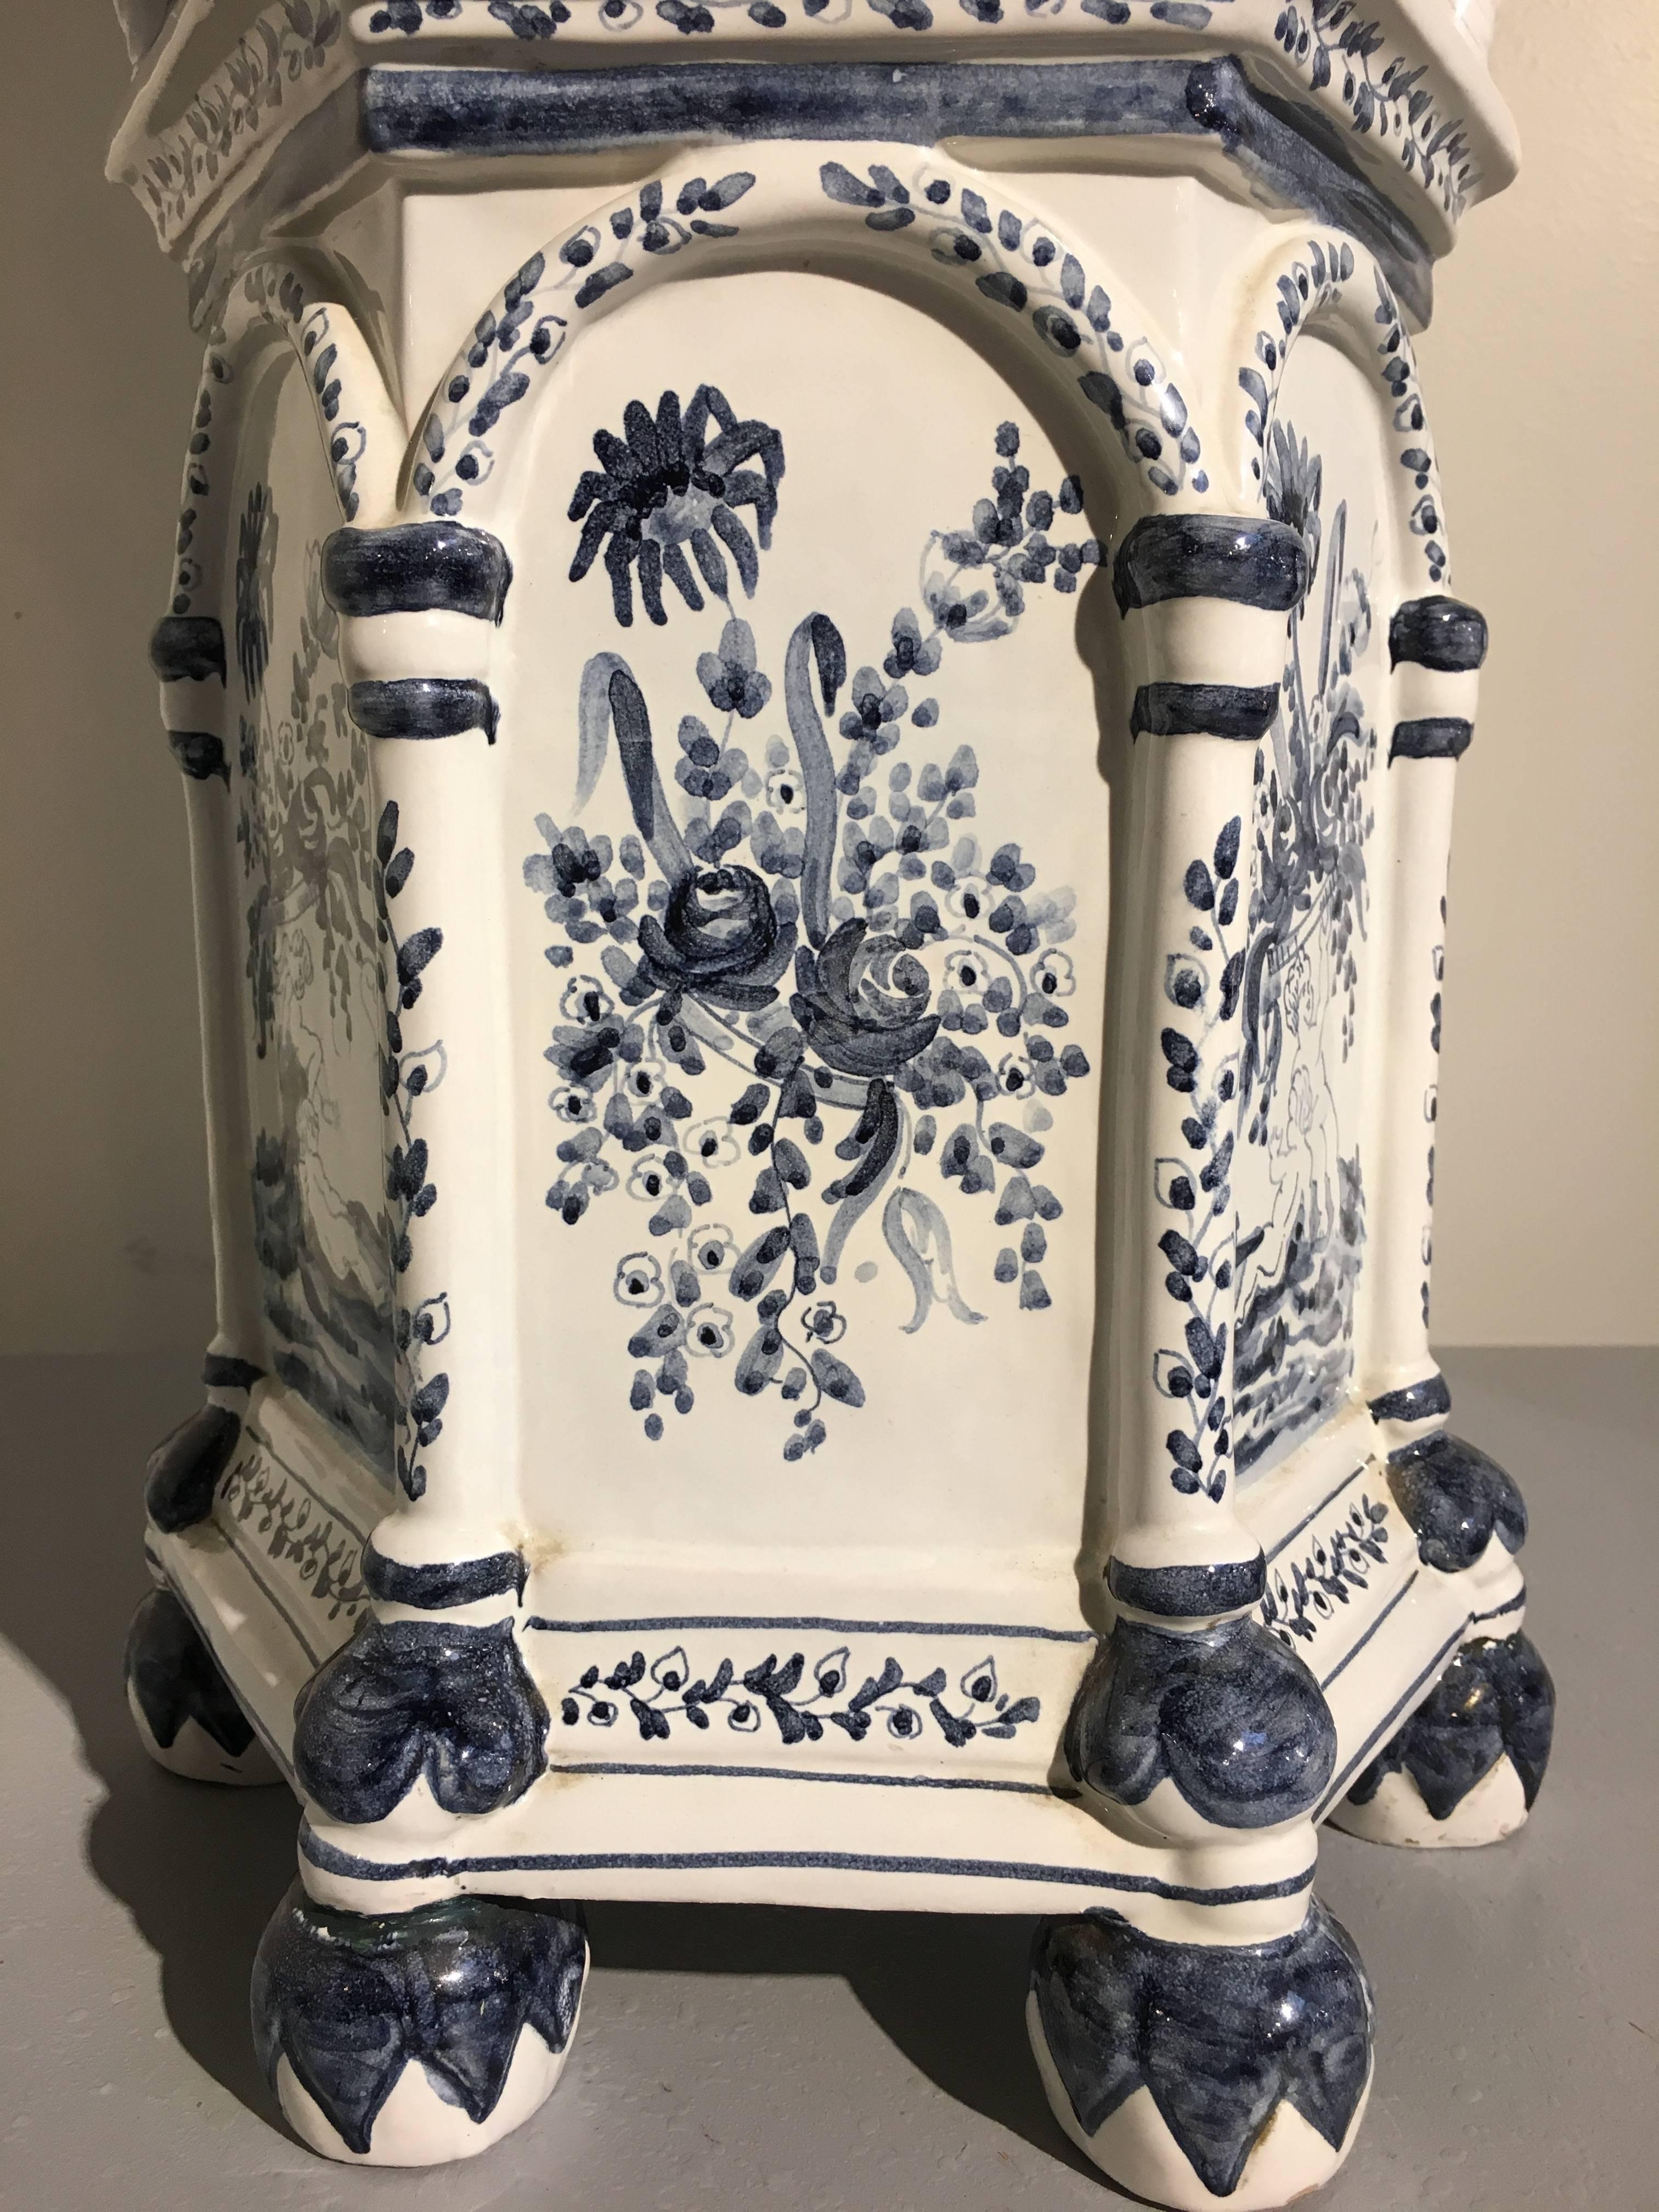 Chinoiserie Italian Blue and White Painted Faience Pagoda Form Tulipiere, Mid-20th Century